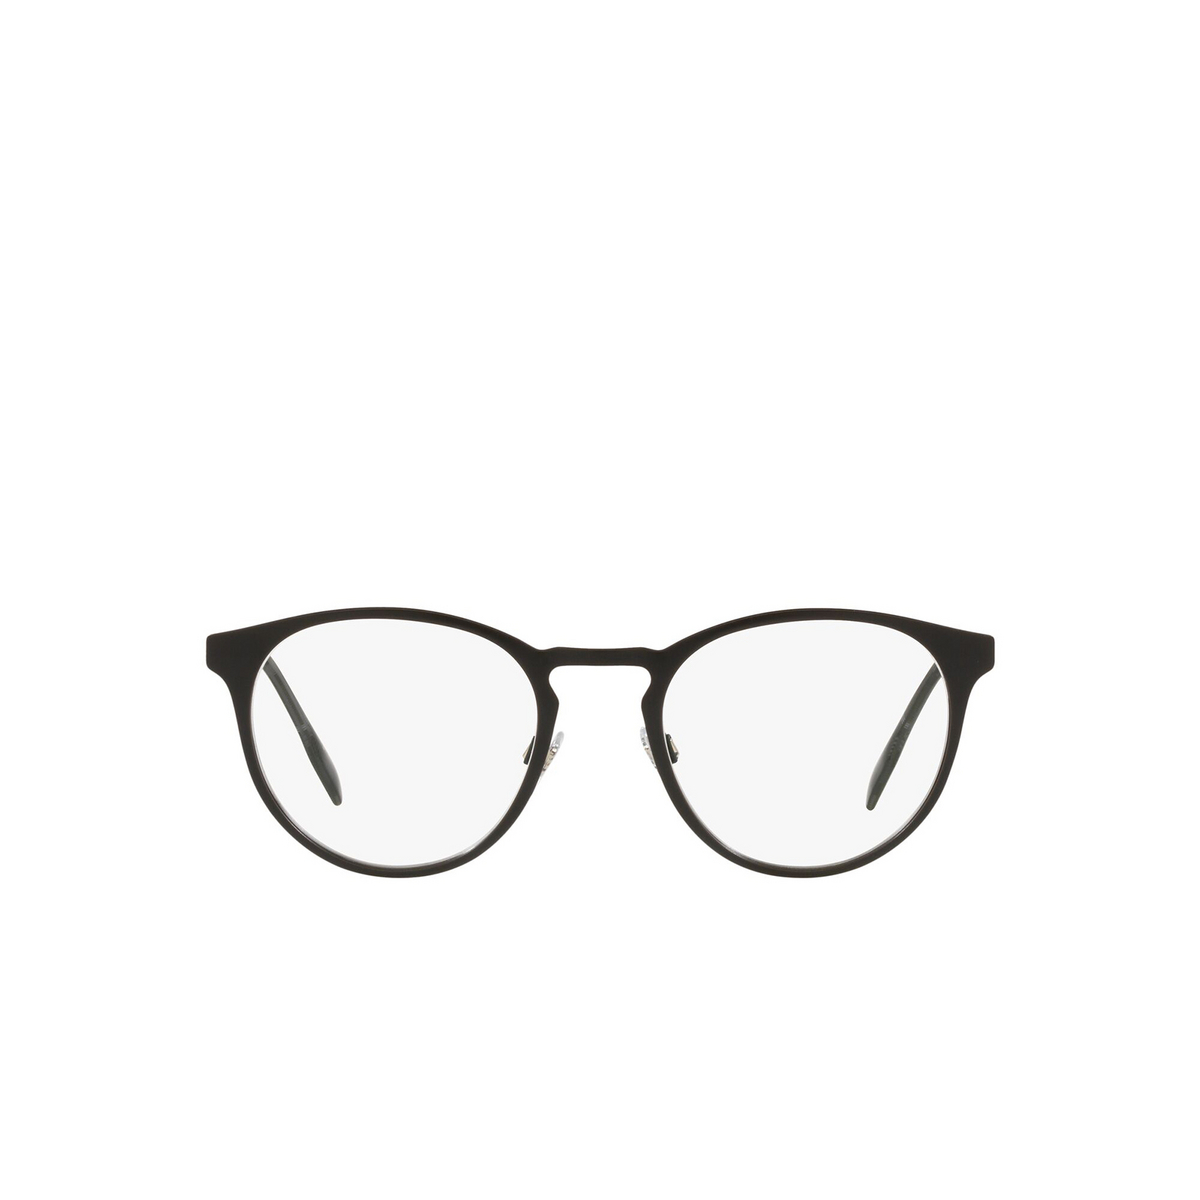 Burberry® Round Eyeglasses: York BE1360 color Matte Black 1001 - front view.